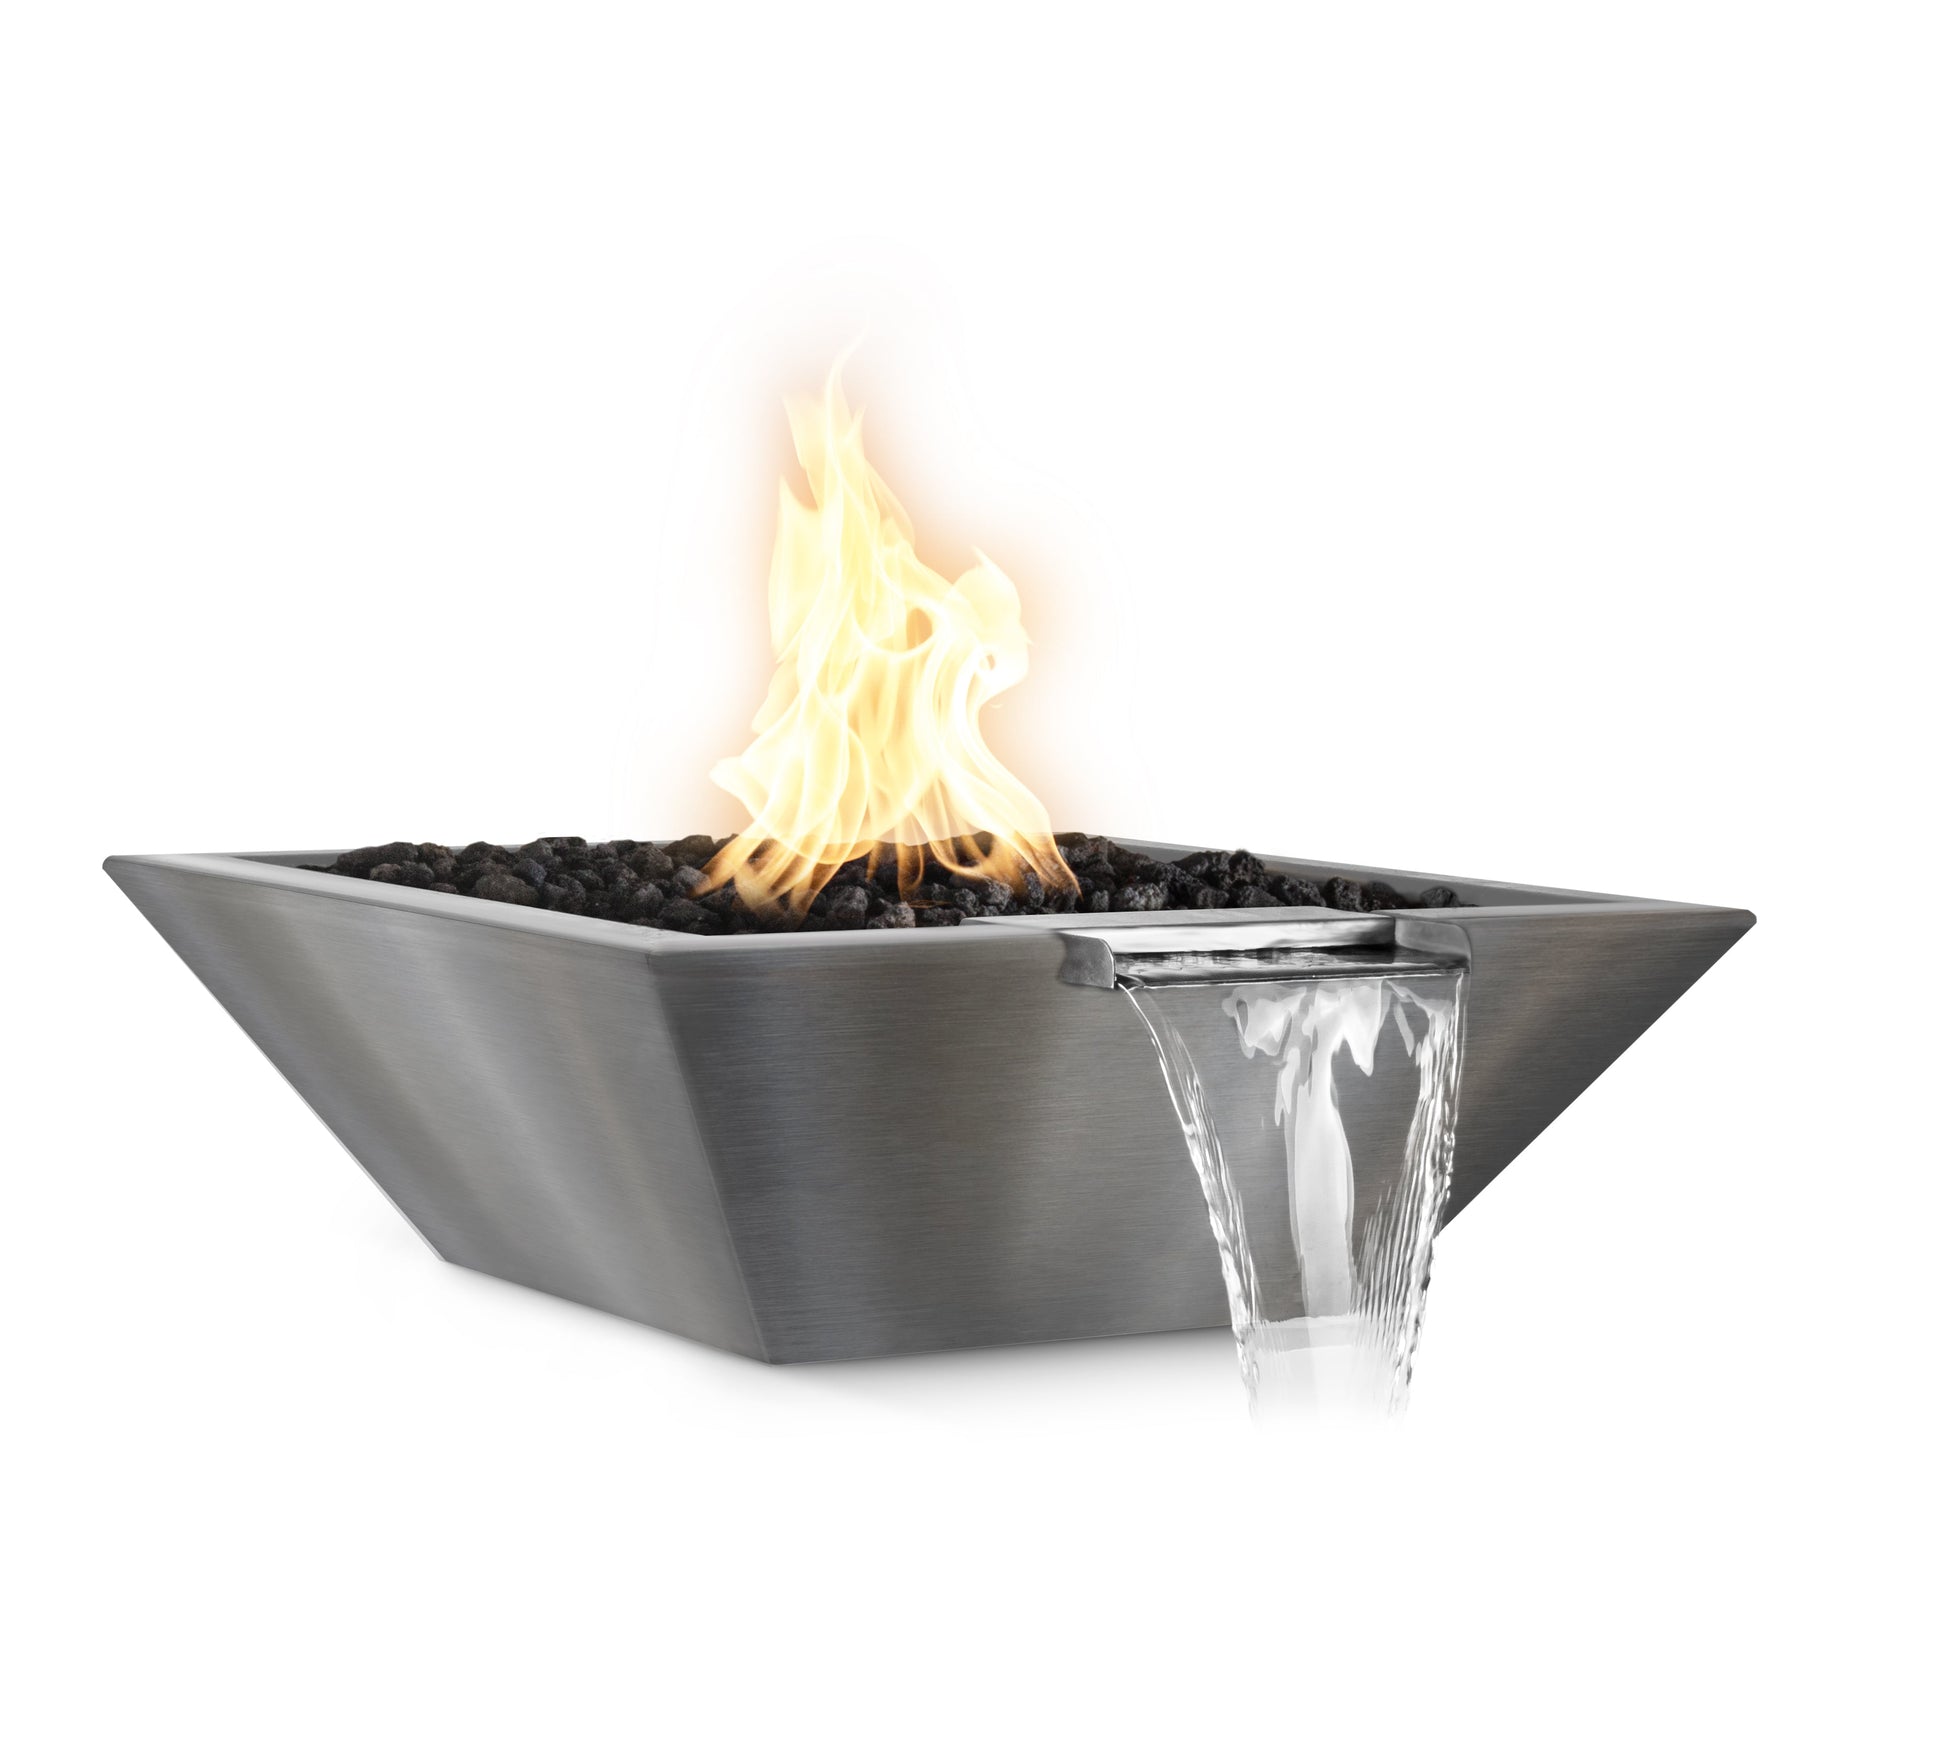 The Outdoor Plus Square Maya 30" Stainless Steel Liquid Propane Fire & Water Bowl with Match Lit with Flame Sense Ignition